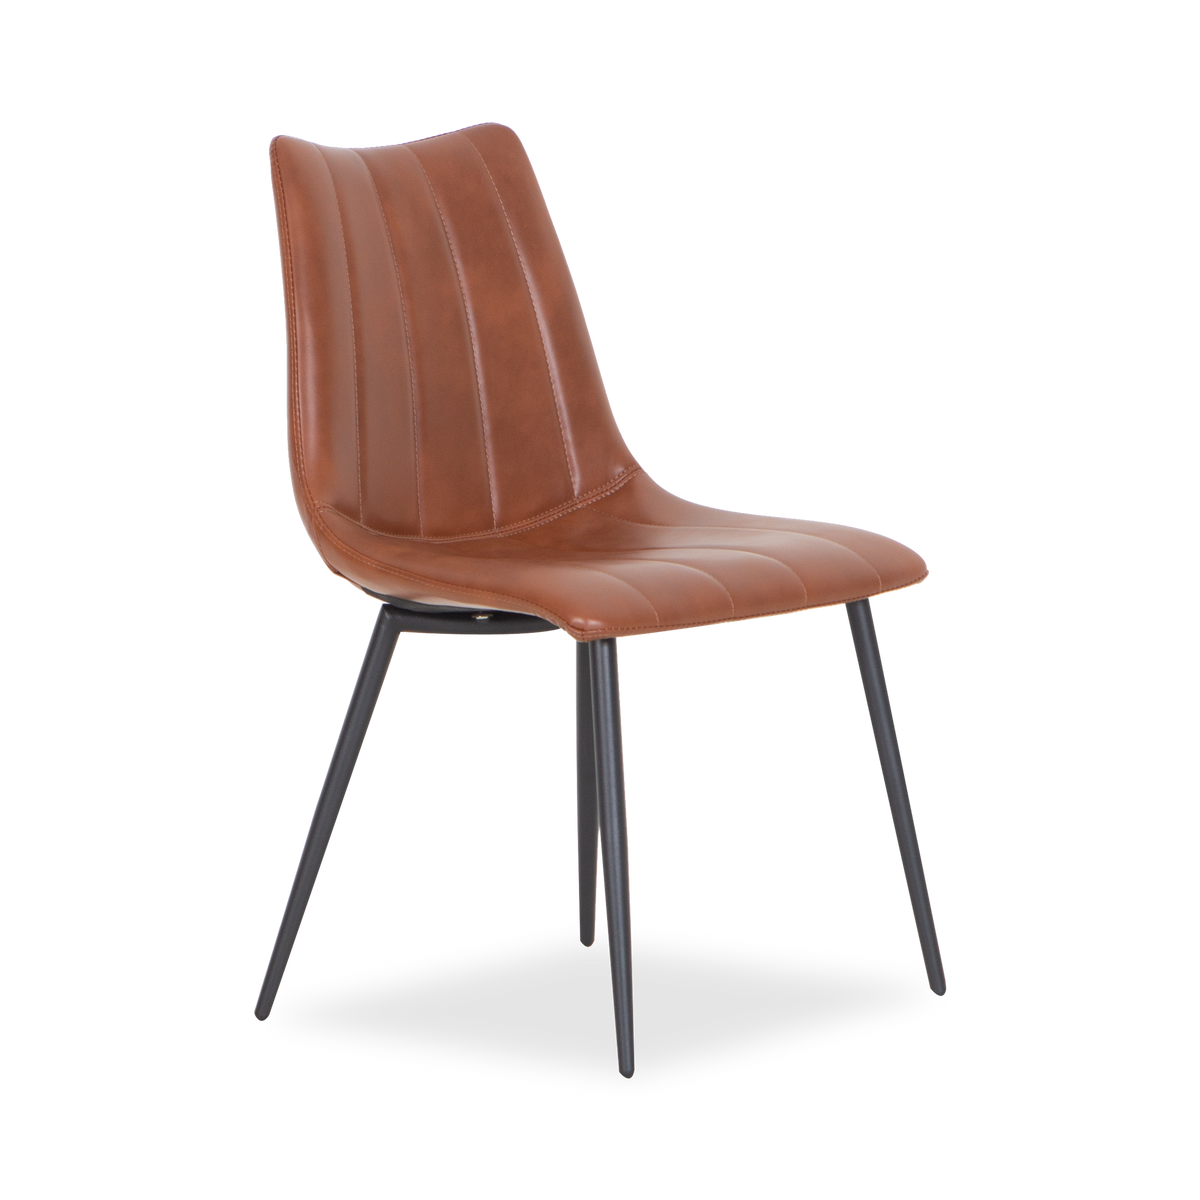 A new take on contemporary dining, the Roark Side Chair is contoured to perfection.